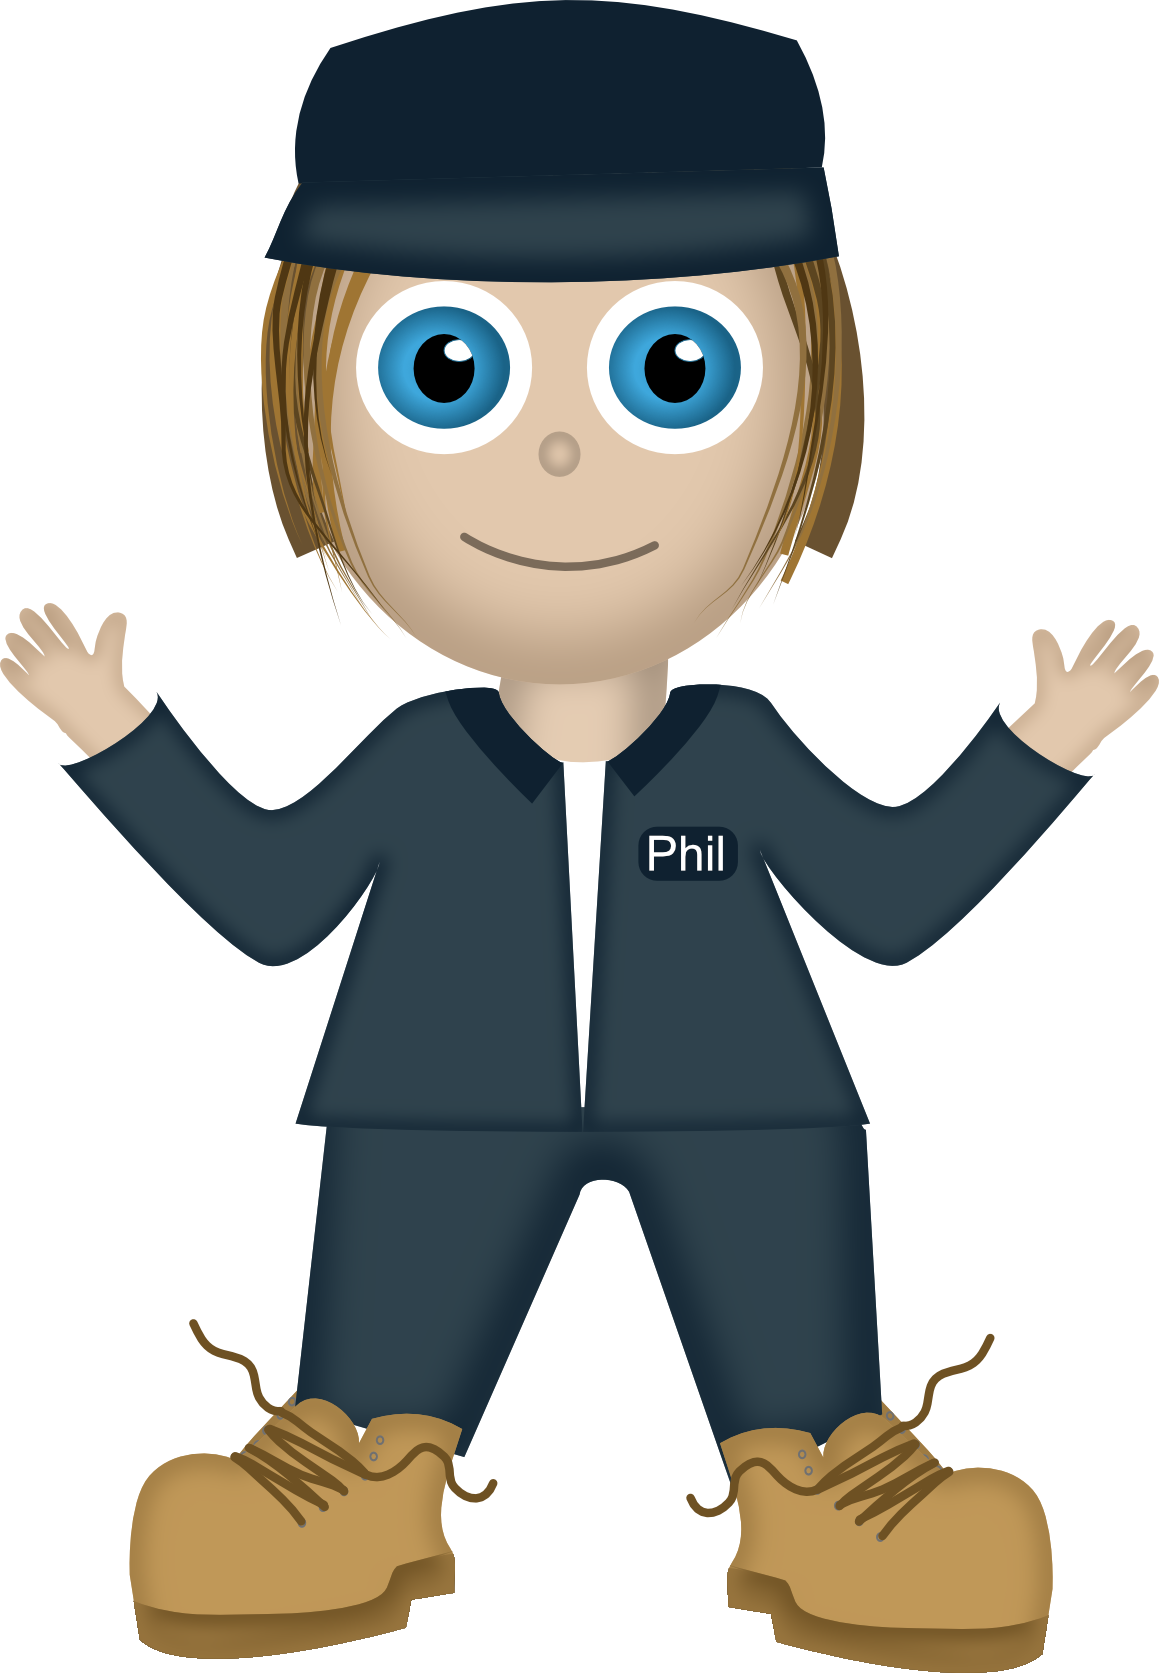 Phil the Pilot – Character Insight